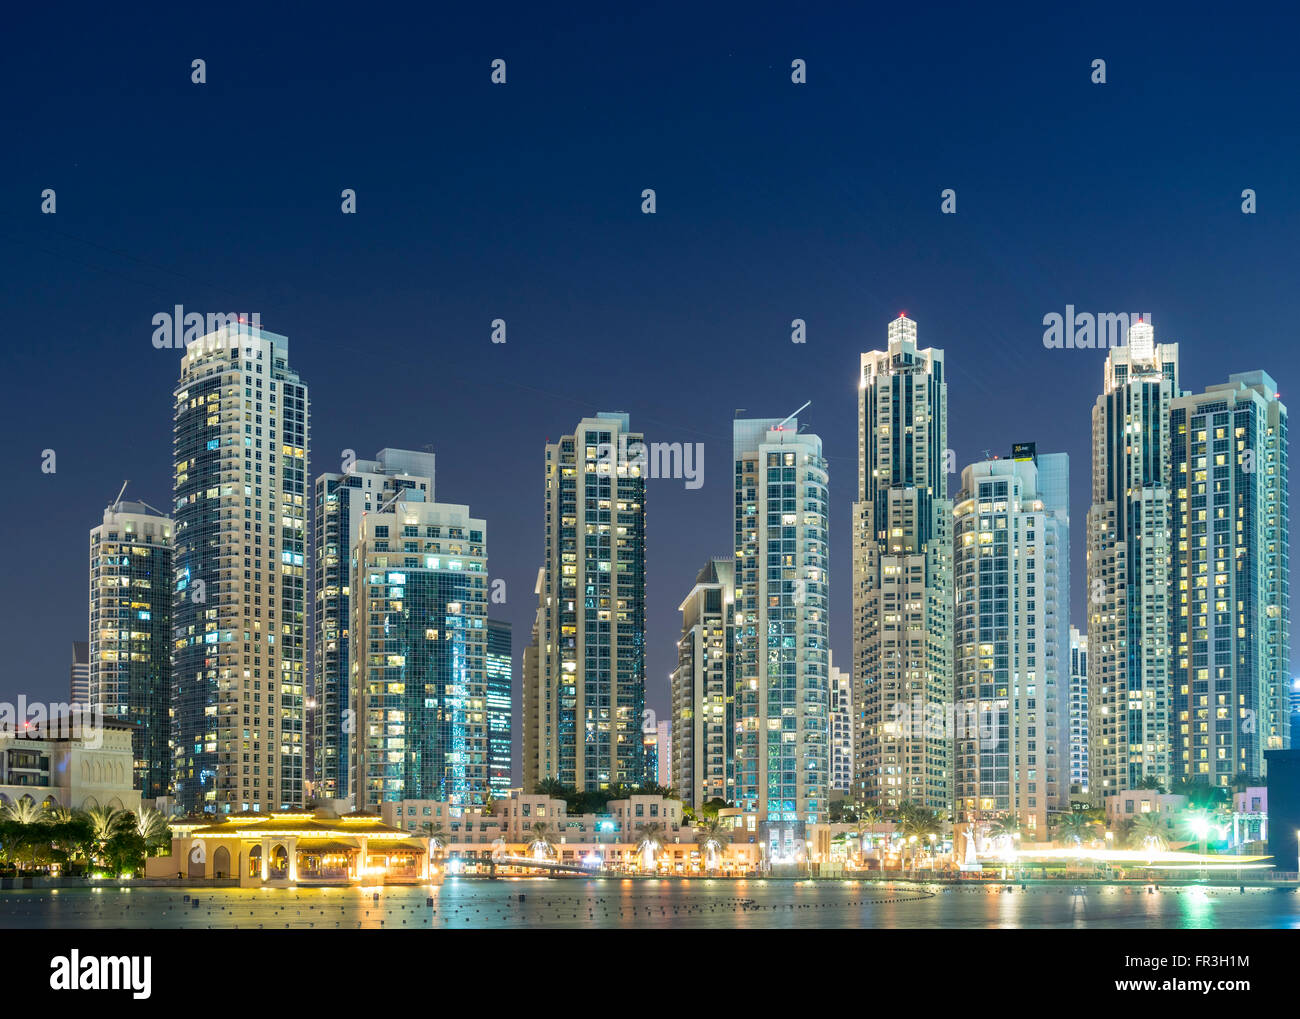 Night view of many high-rise luxury apartment towers in Downtown Dubai United Arab Emirates Stock Photo